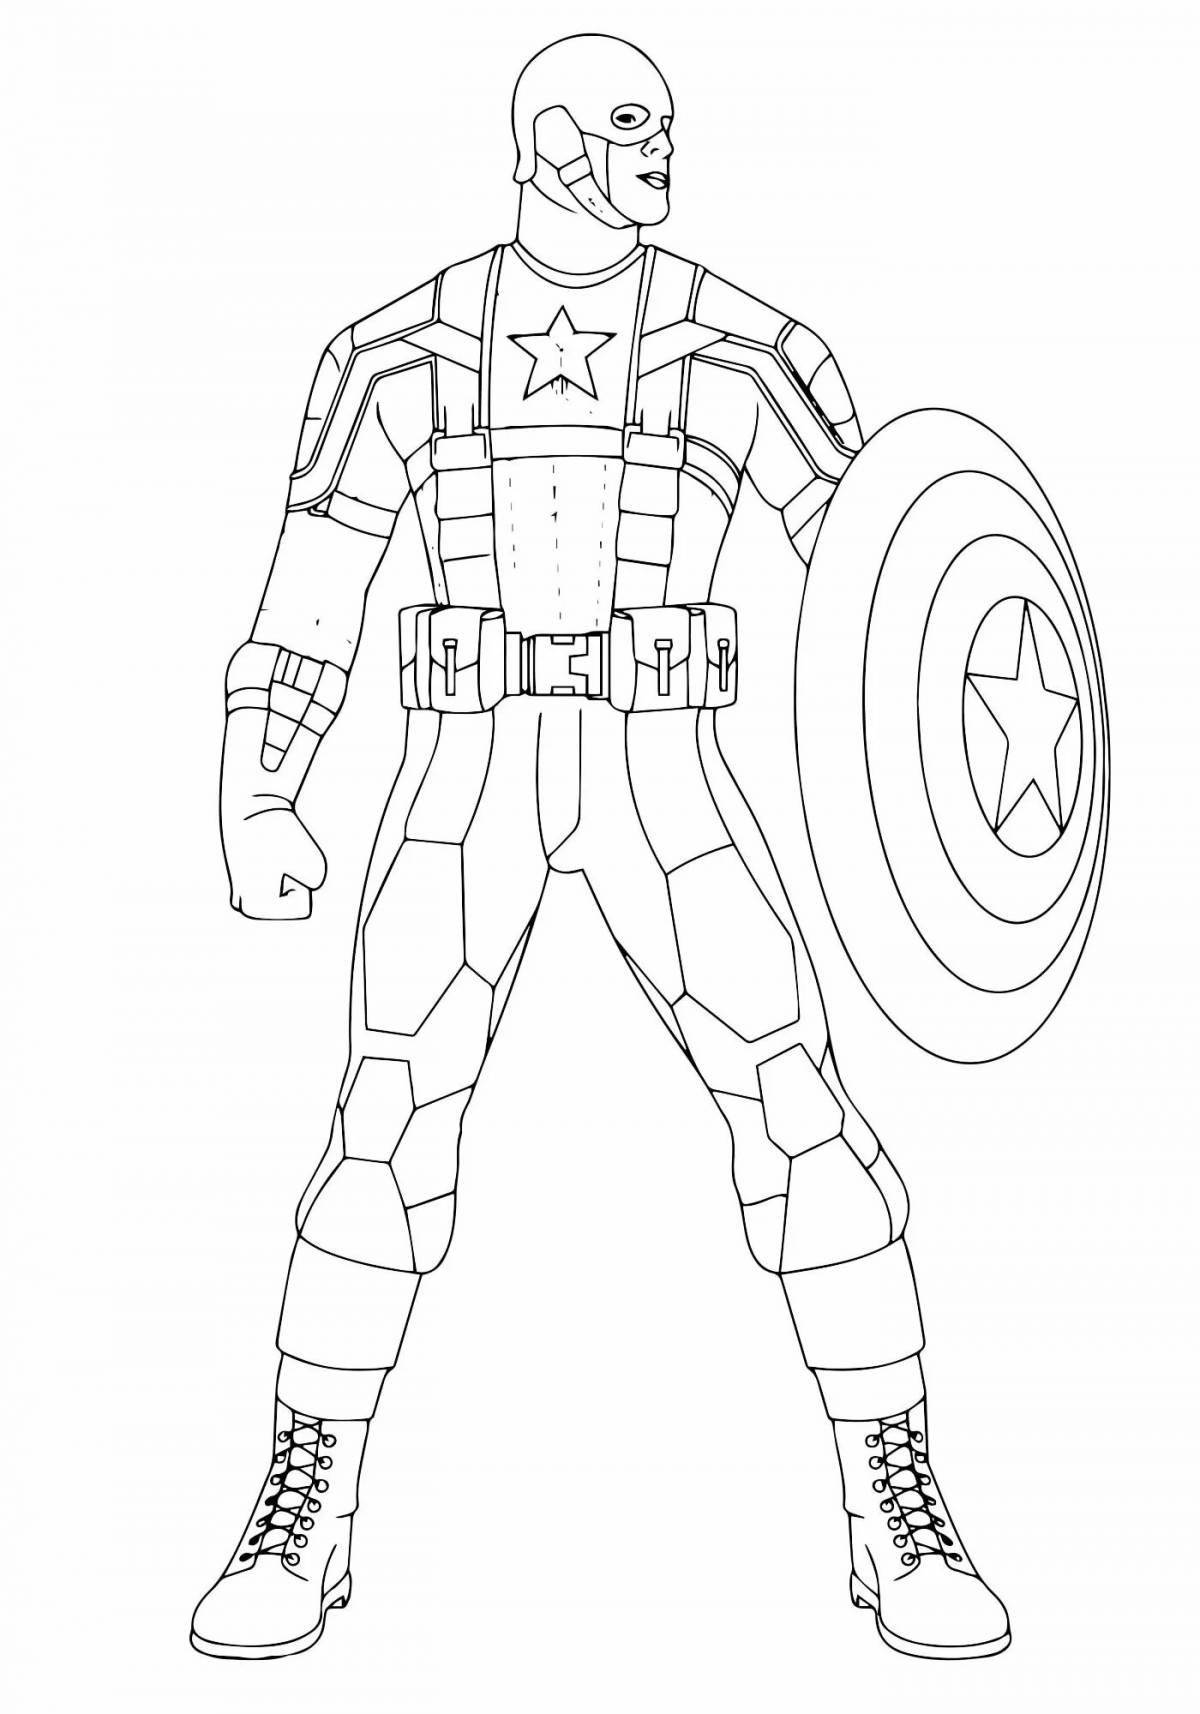 Colourful marvel coloring book for kids